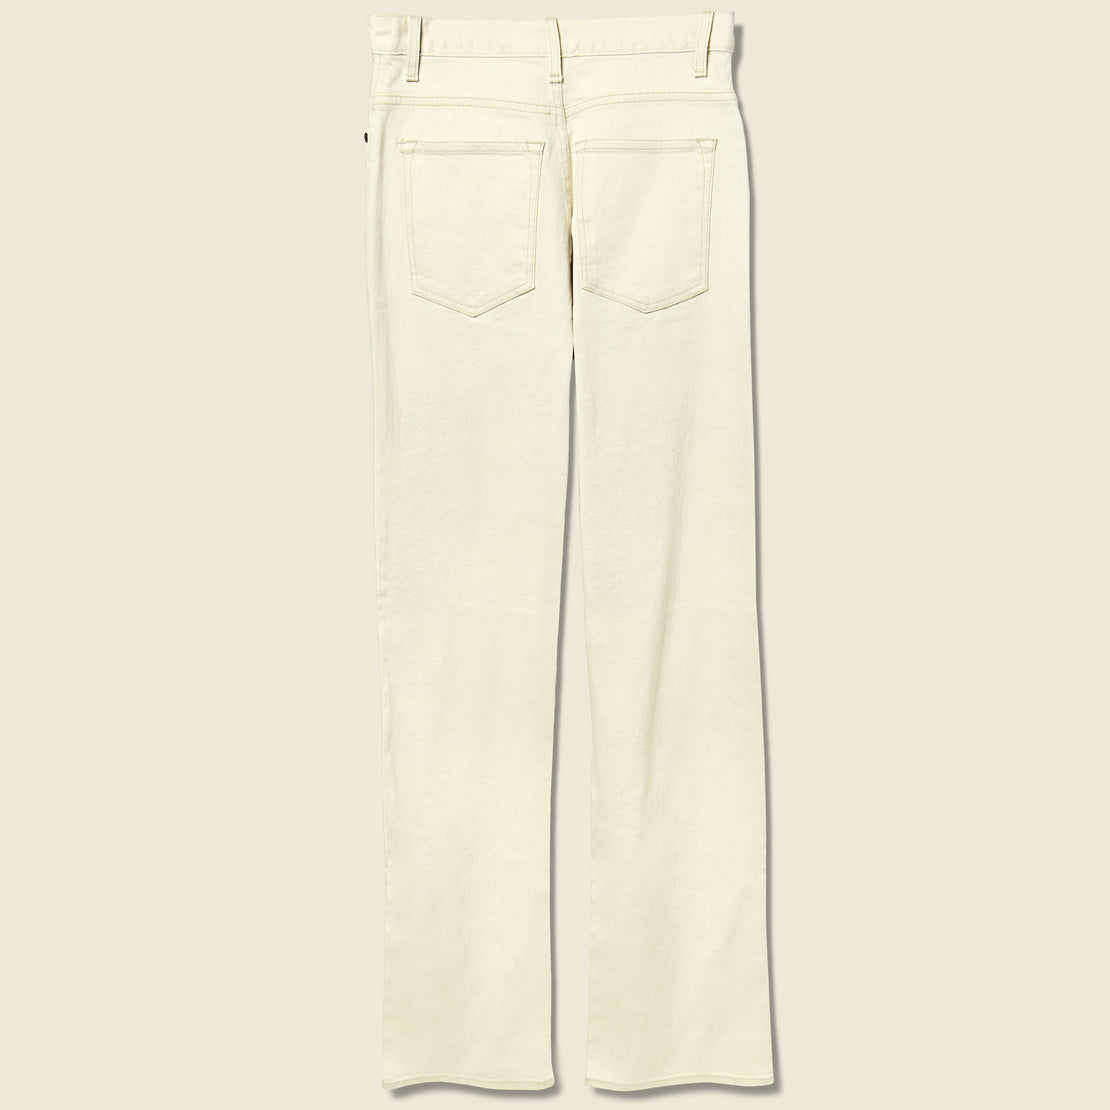 Catherine Jean - Natural - Imogene + Willie - STAG Provisions - W - Pants - Denim